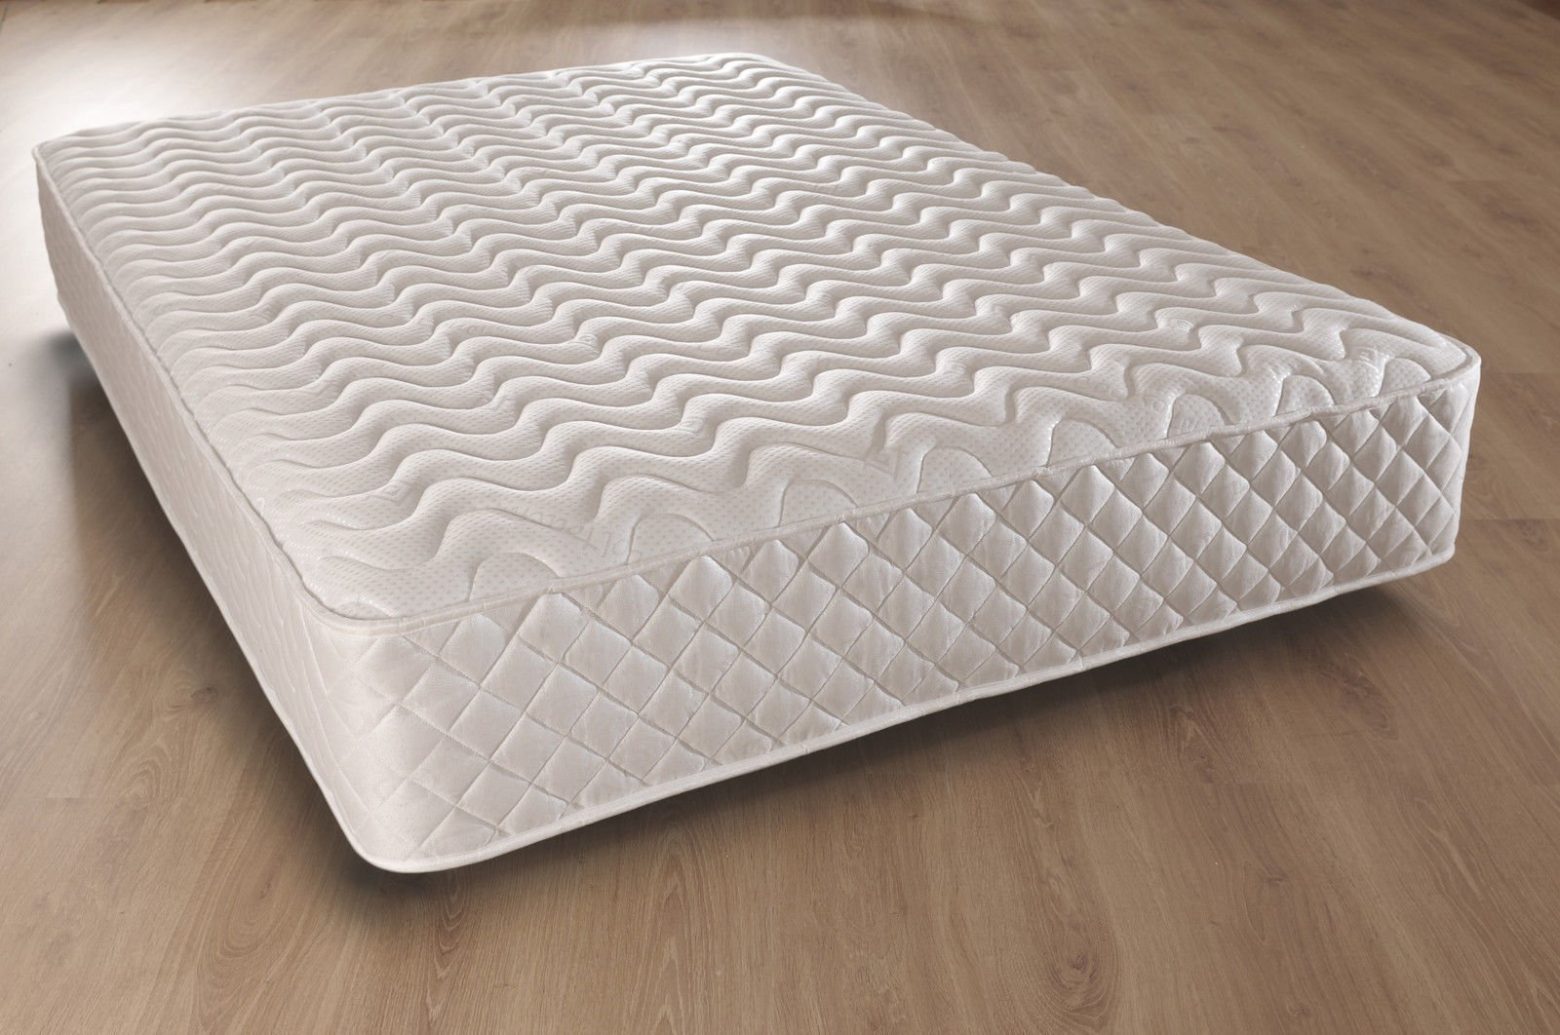 is foam or spring mattress better for back